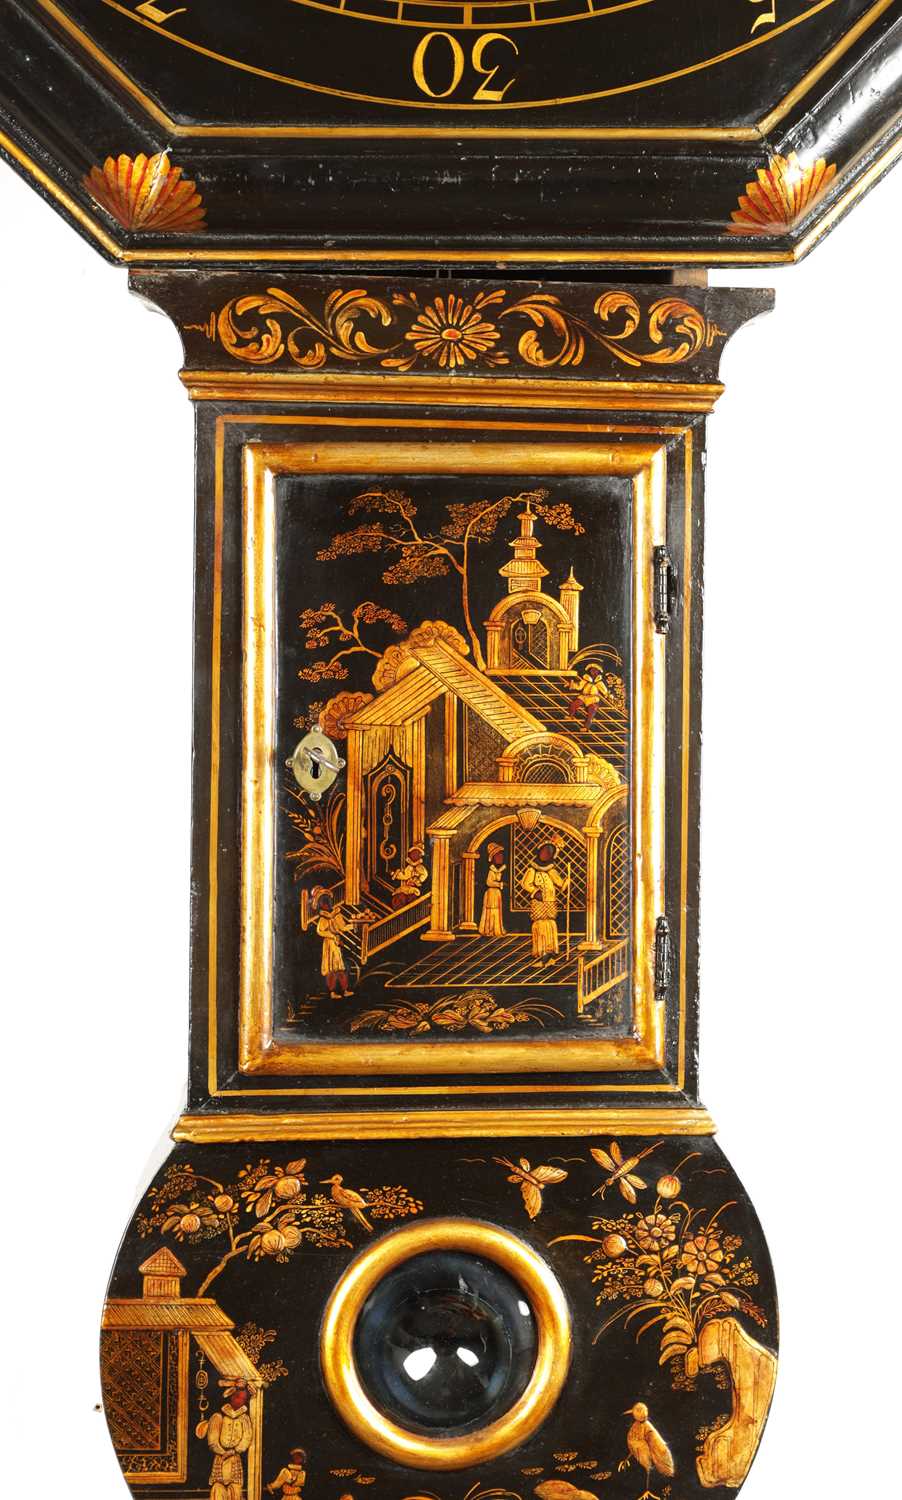 JOHN TICKELL, CREDITON. A RARE EARLY 18TH CENTURY LACQUERED CHINOISERIE TAVERN CLOCK OF LARGE SIZE - Image 3 of 21